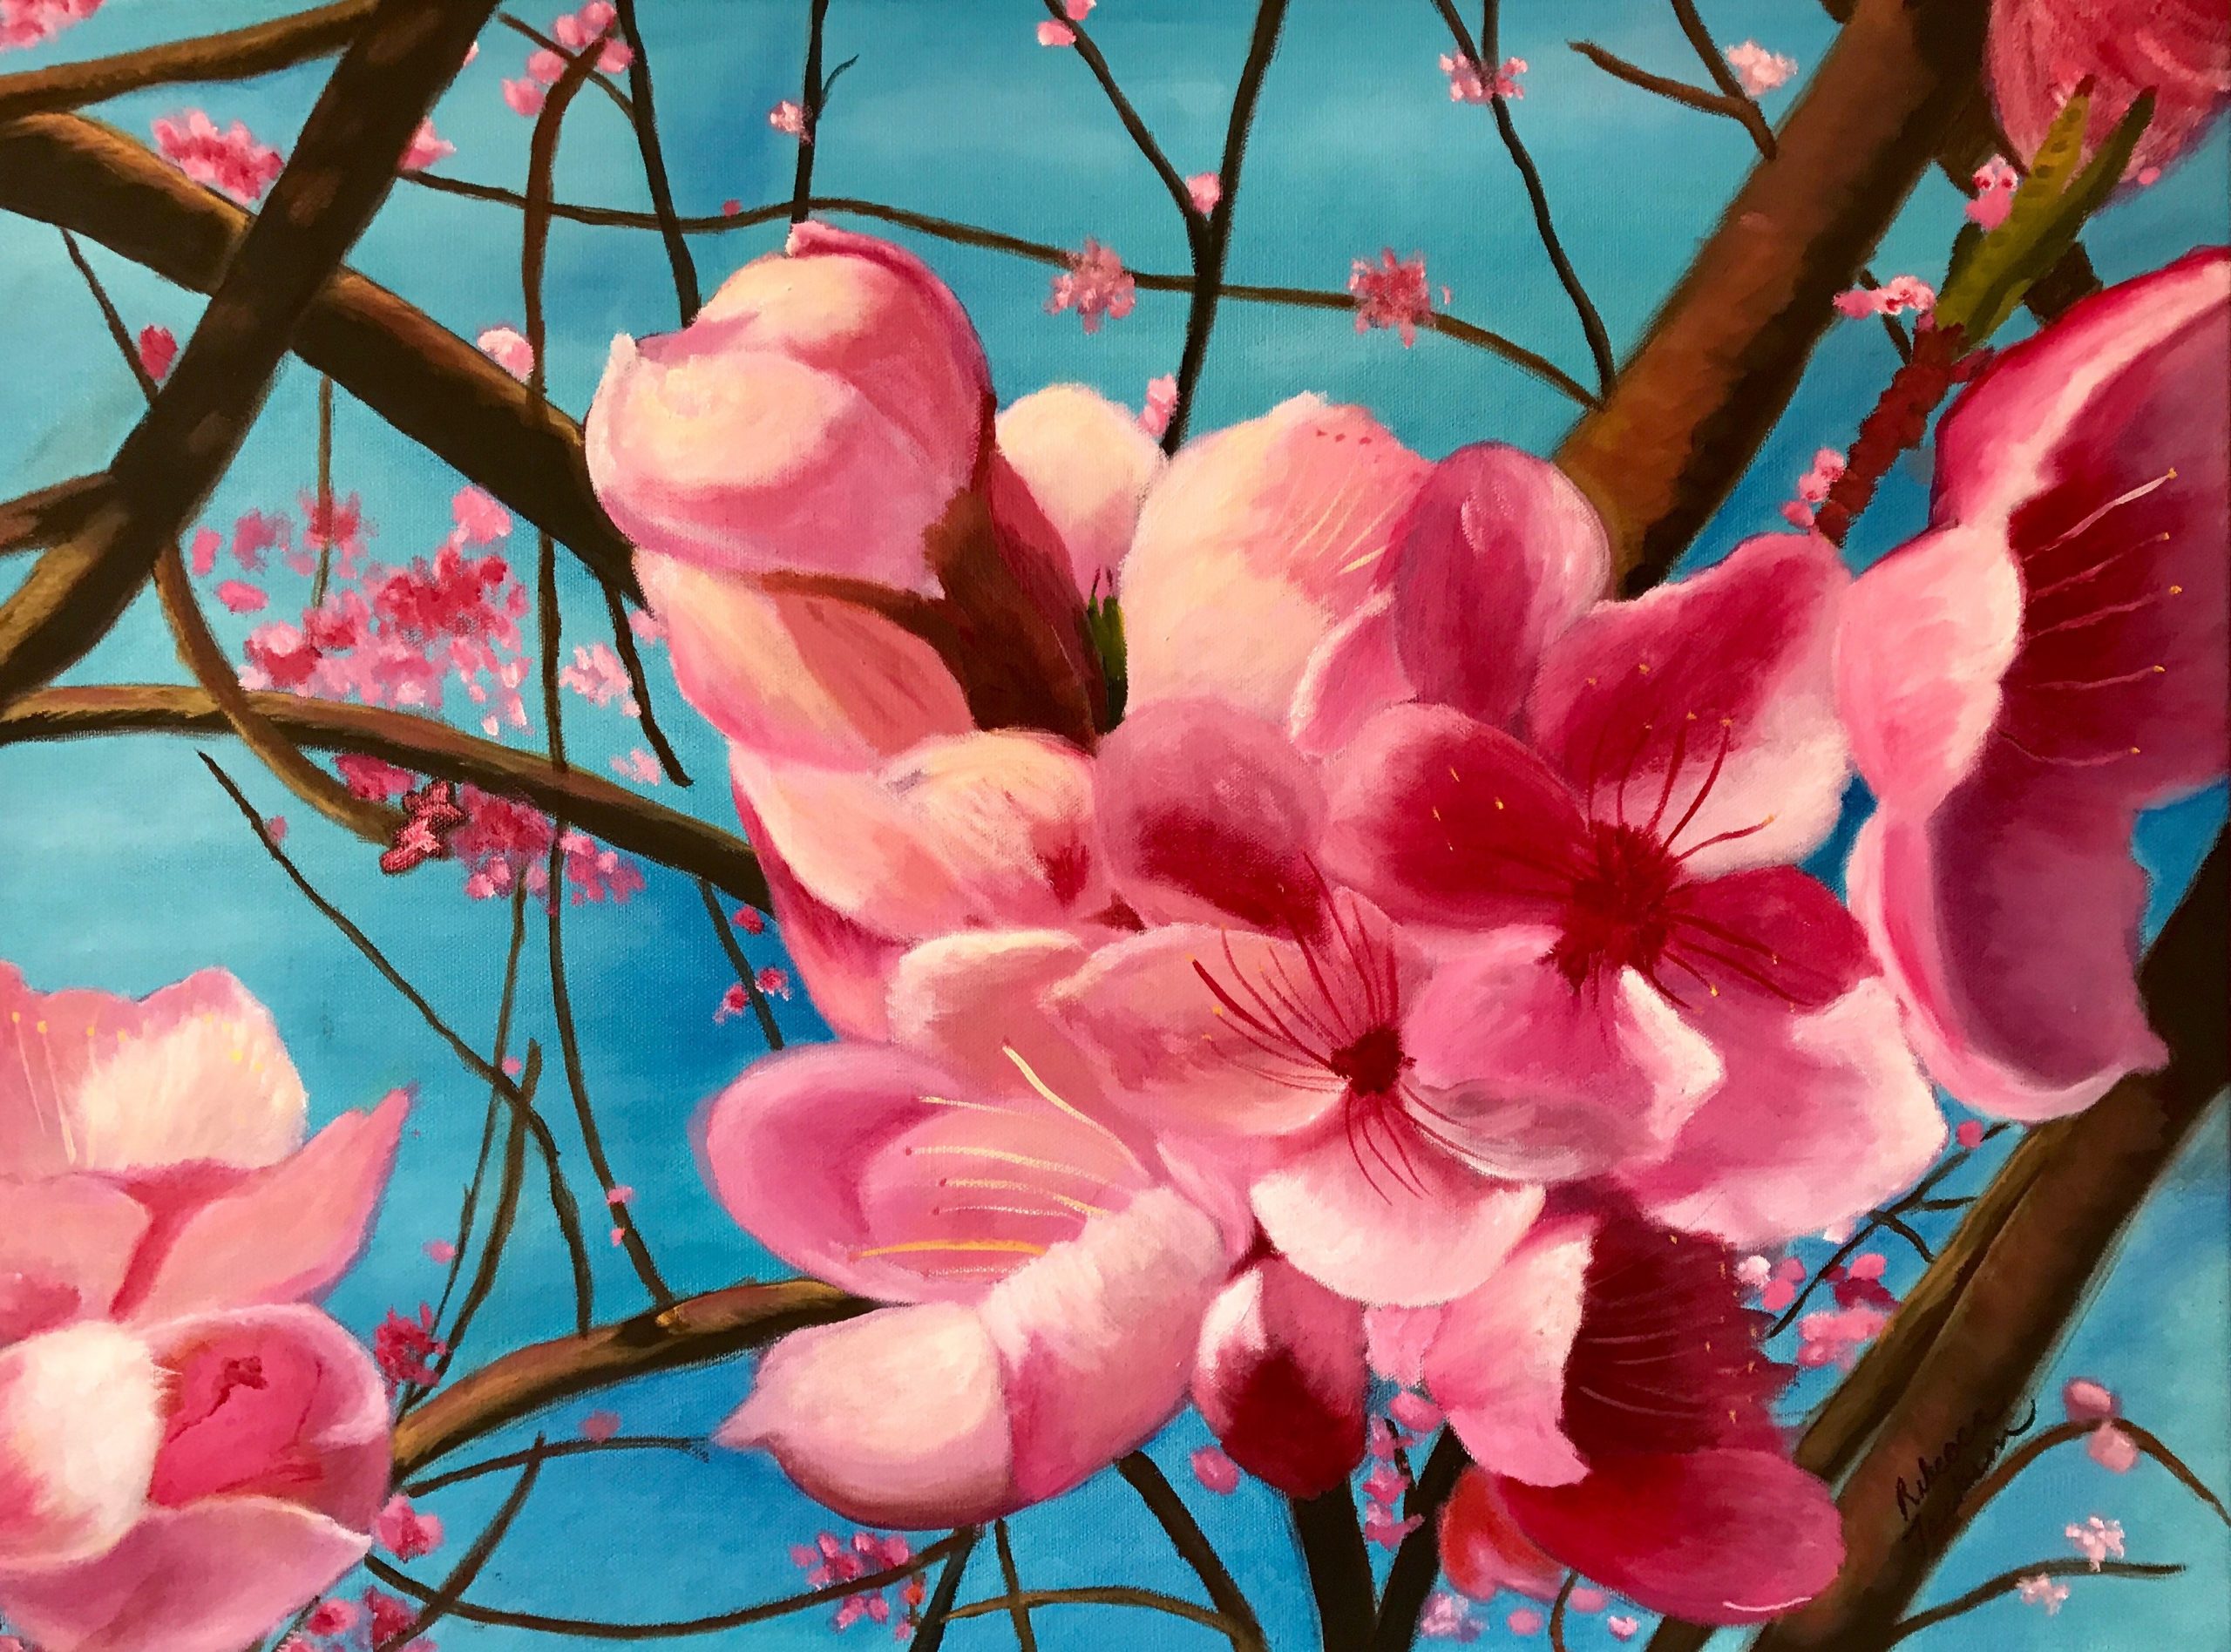 Peach Blossoms Oil painting by Rebecca Jackson, Exhibit at Brookside Gardens